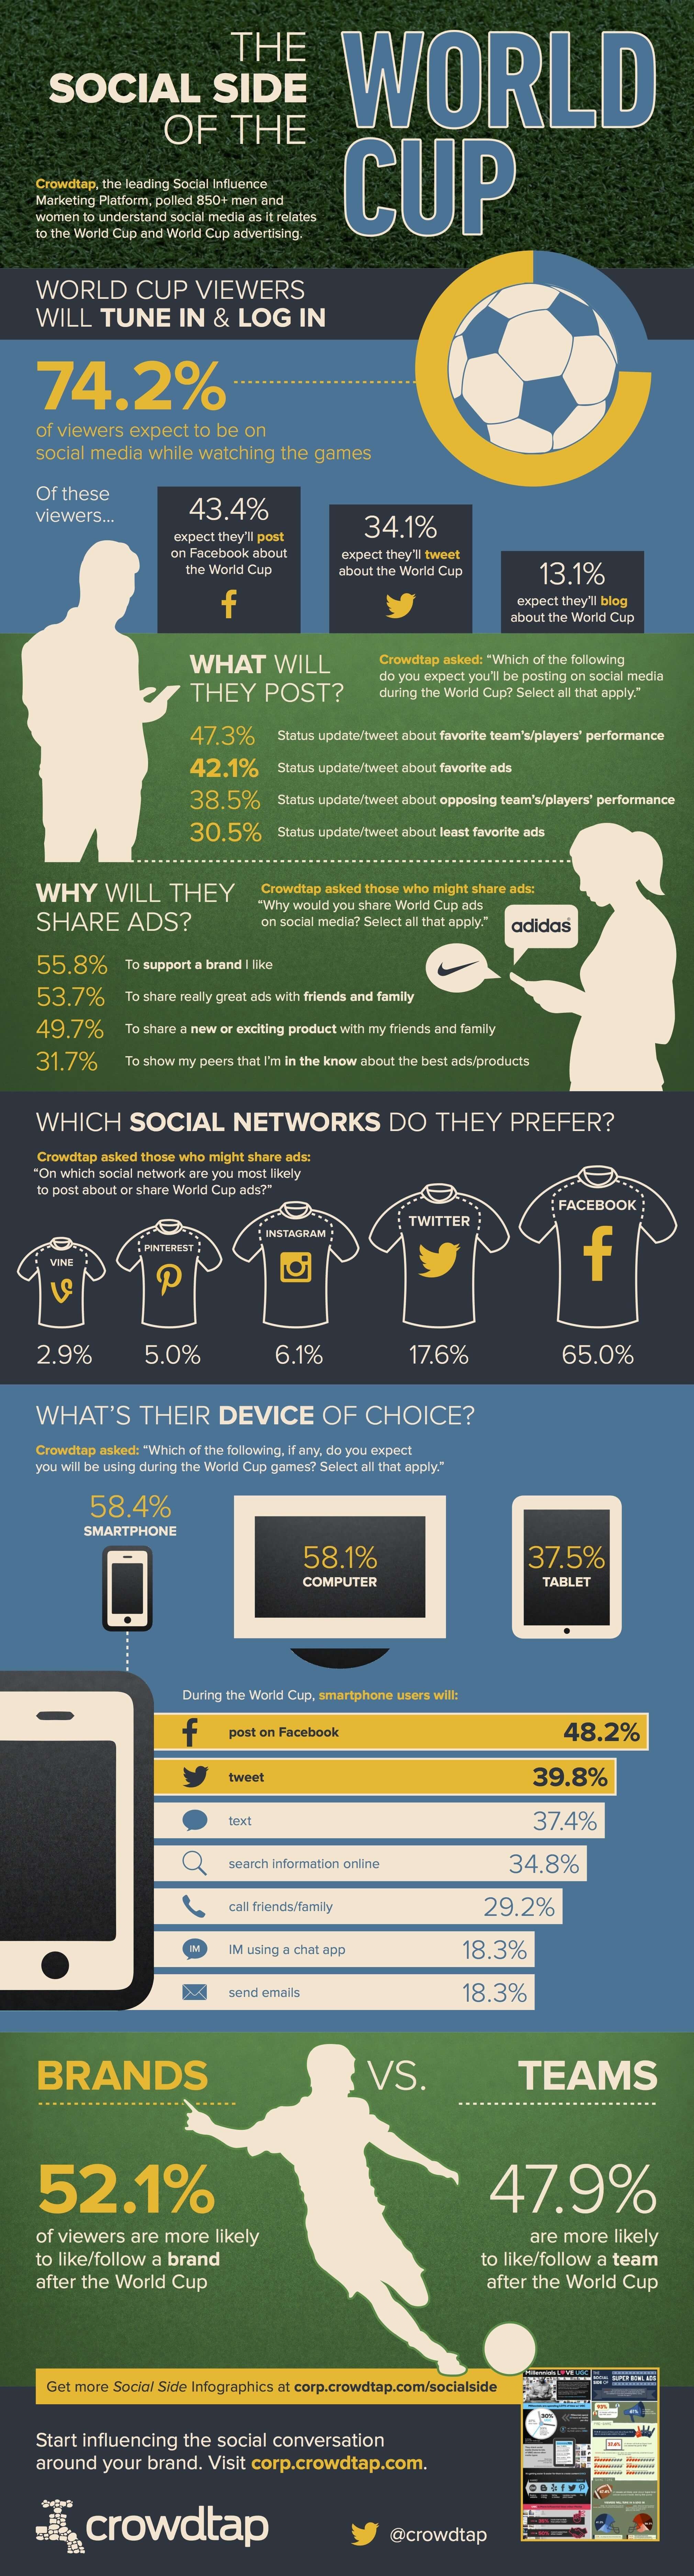 crowdtap world cup infographic FINAL 74% of World Cup Viewers Use Social Media During the Games